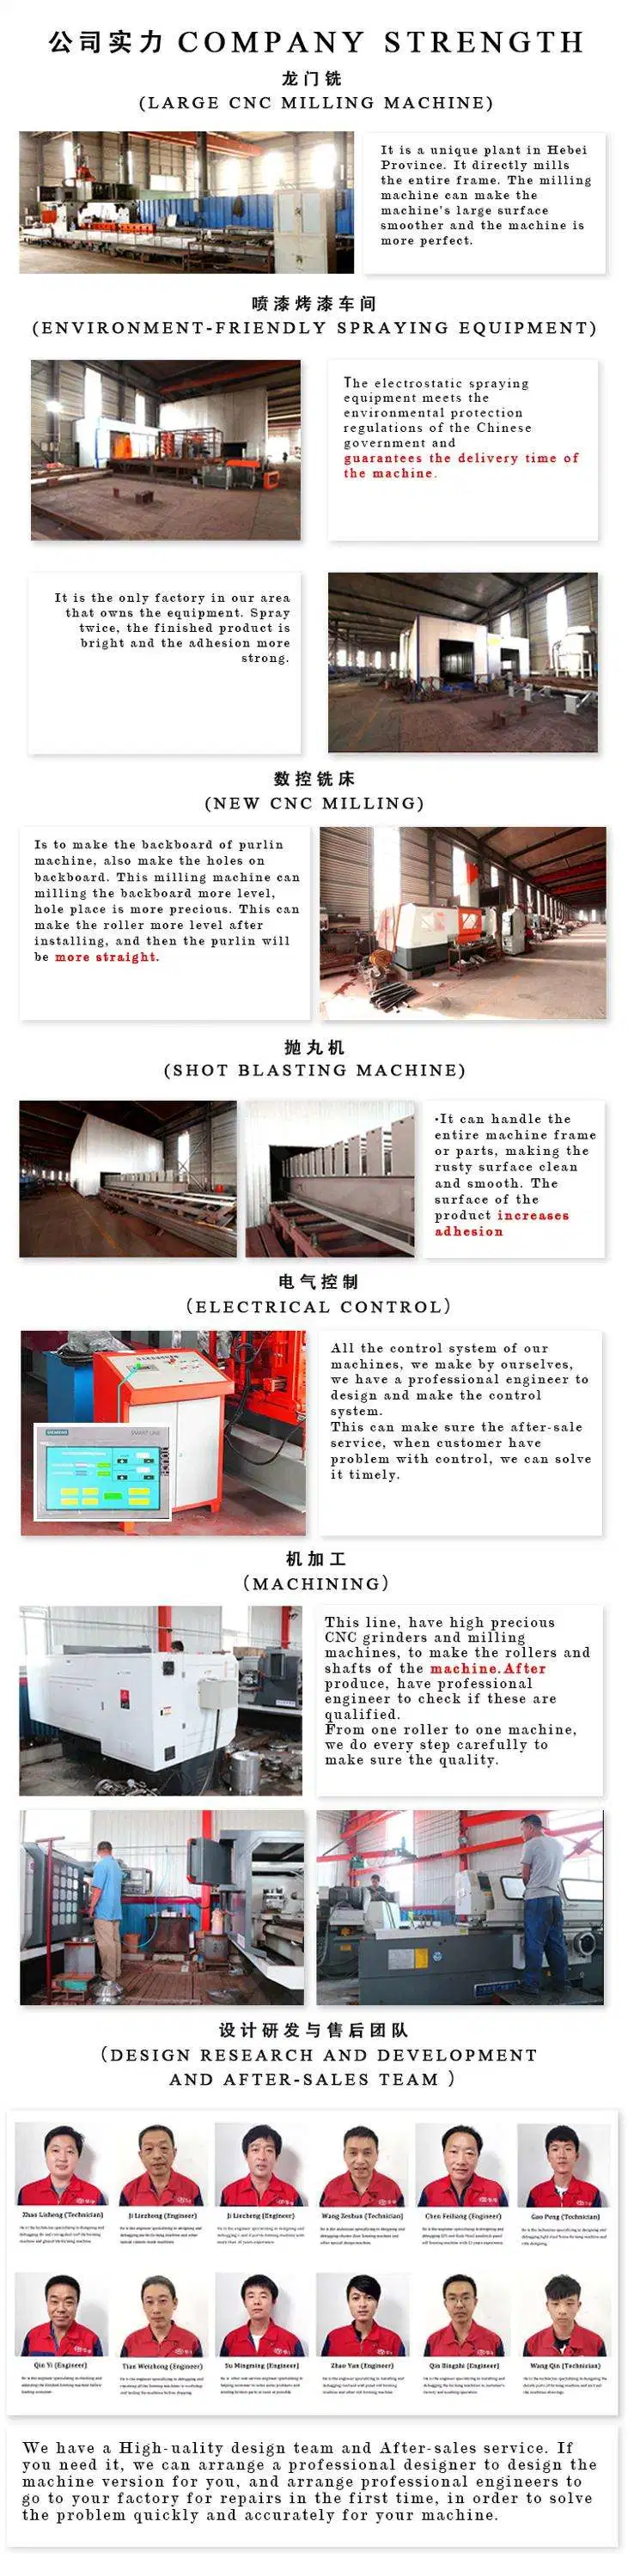 Metal Roof Sheet Panel Hydraulic Arch Curving Crimping Bending Machine